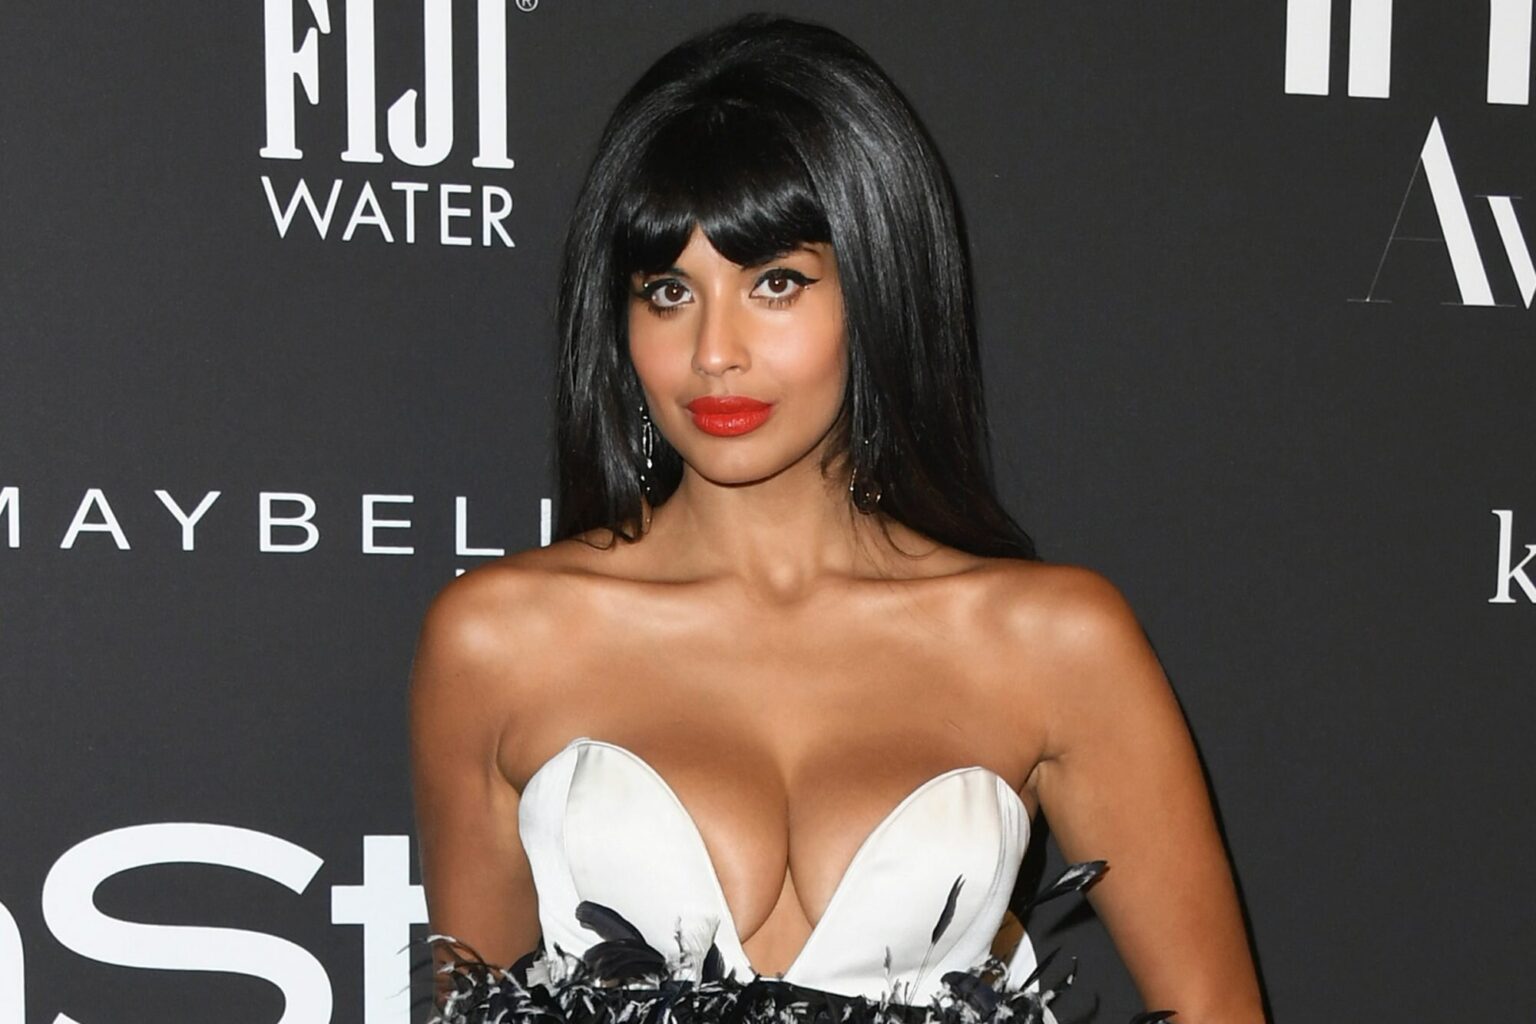 'The Good Place' actress Jameela Jamil has her reservations about the upcoming 'He's All That'. Do we have the same concerns about this remake?